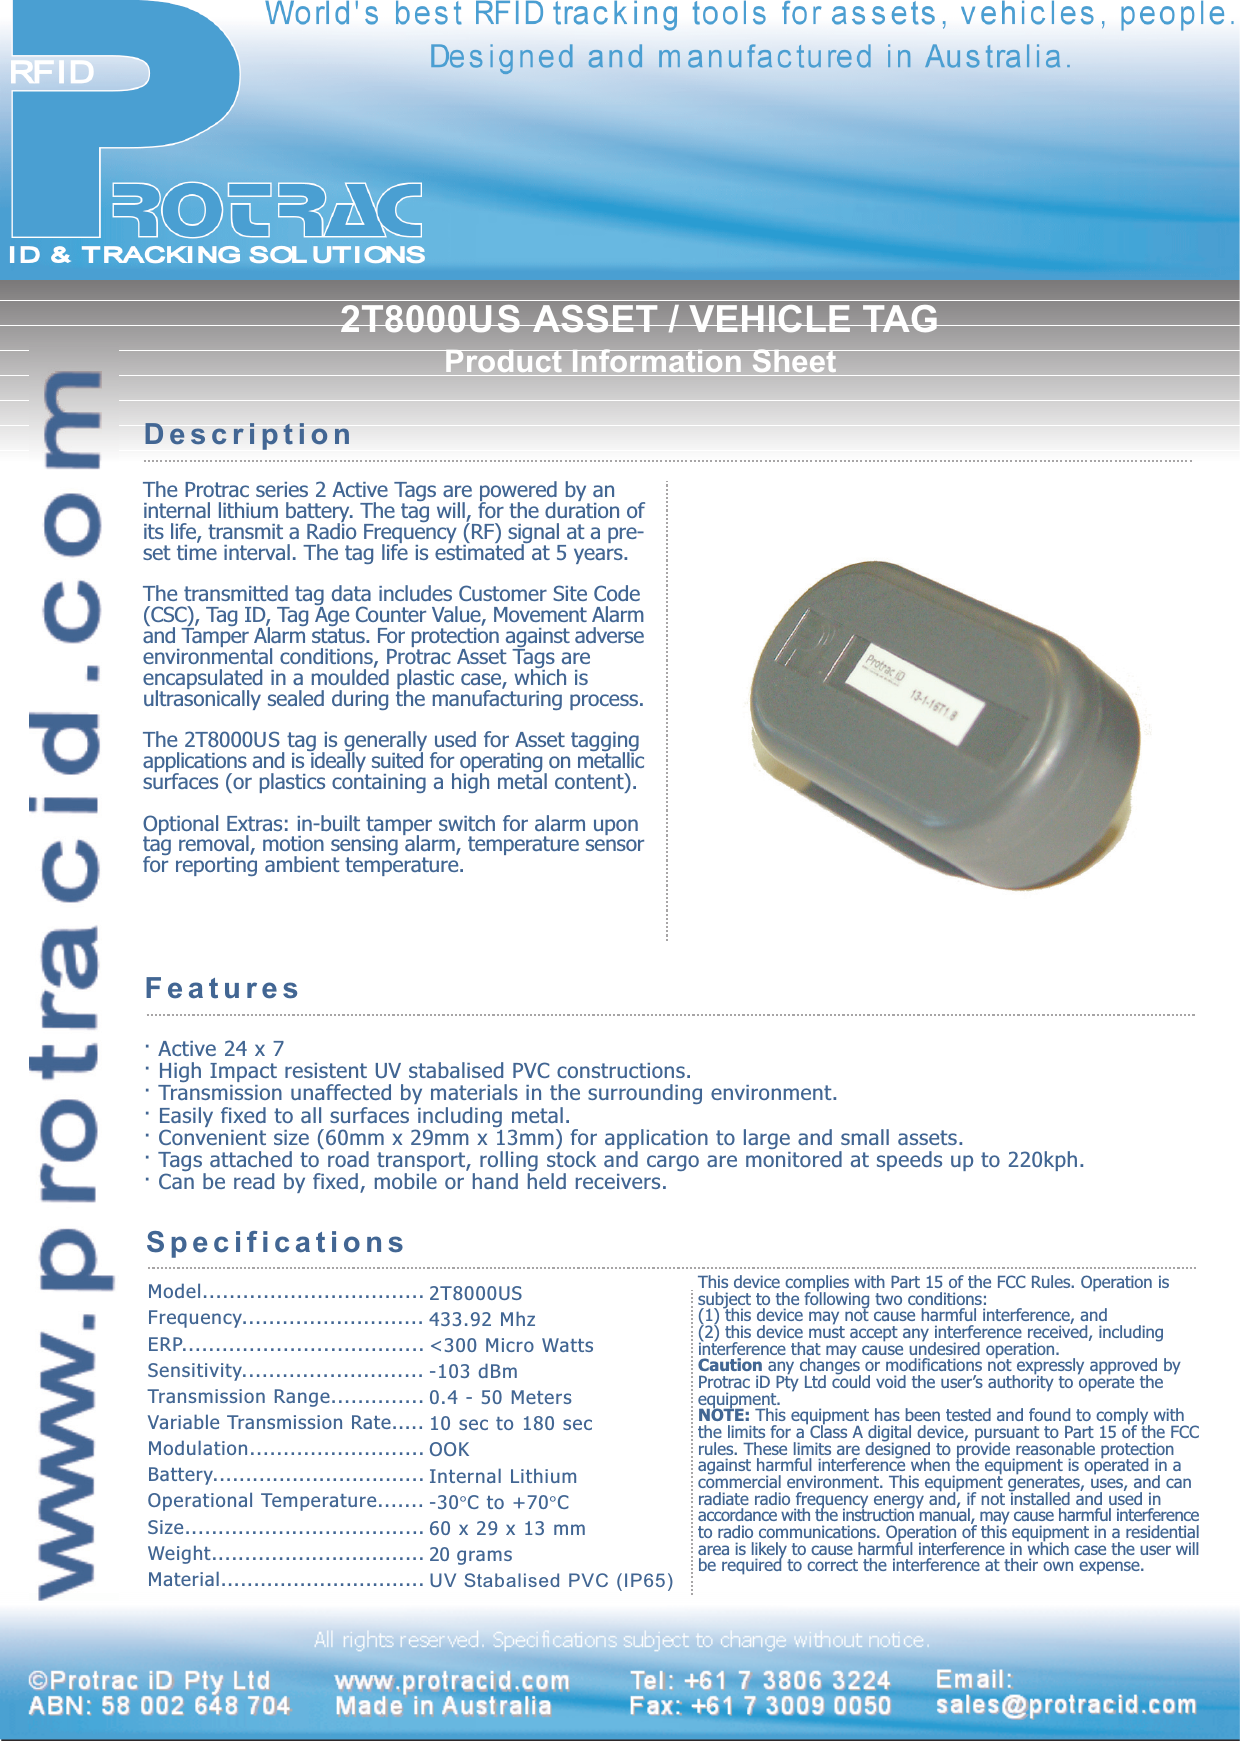 2T8000US ASSET / VEHICLE TAGProduct Information SheetThe Protrac series 2 Active Tags are powered by aninternal lithium battery. The tag will, for the duration ofits life, transmit a Radio Frequency (RF) signal at a pre-set time interval. The tag life is estimated at 5 years.The transmitted tag data includes Customer Site Code(CSC), Tag ID, Tag Age Counter Value, Movement Alarmand Tamper Alarm status. For protection against adverseenvironmental conditions, Protrac Asset Tags areencapsulated in a moulded plastic case, which isultrasonically sealed during the manufacturing process.The 2T8000US tag is generally used for Asset taggingapplications and is ideally suited for operating on metallicsurfaces (or plastics containing a high metal content).Optional Extras: in-built tamper switch for alarm upontag removal, motion sensing alarm, temperature sensorfor reporting ambient temperature.DescriptionFeatures· Active 24 x 7· High Impact resistent UV stabalised PVC constructions.· Transmission unaffected by materials in the surrounding environment.· Easily fixed to all surfaces including metal.· Convenient size (60mm x 29mm x 13mm) for application to large and small assets.· Tags attached to road transport, rolling stock and cargo are monitored at speeds up to 220kph.· Can be read by fixed, mobile or hand held receivers.SpecificationsModel.................................Frequency...........................ERP....................................Sensitivity...........................Transmission Range..............Variable Transmission Rate.....Modulation..........................Battery................................Operational Temperature.......Size....................................Weight................................Material...............................2T8000US433.92 Mhz&lt;300 Micro Watts-103 dBm0.4 - 50 Meters10 sec to 180 secOOKInternal Lithium-30°C to +70°C60 x 29 x 13 mm20 gramsUV Stabalised PVC (IP65)All rights reserved. Specifications subject to change without notice.©©Protrac iD Pty LtProtrac iD Pty LtddABN: 58 002 648 704ABN: 58 002 648 704 wwwwww.protracid.com.protracid.comMade in Made in AustraliaAustraliaTTel: +61 7 3806 3224el: +61 7 3806 3224Fax: +61 7 3009 0050Fax: +61 7 3009 0050Email:Email:sales@protracid.comsales@protracid.comThis device complies with Part 15 of the FCC Rules. Operation issubject to the following two conditions:(1) this device may not cause harmful interference, and(2) this device must accept any interference received, includinginterference that may cause undesired operation.Caution any changes or modifications not expressly approved byProtrac iD Pty Ltd could void the users authority to operate theequipment.NOTE: This equipment has been tested and found to comply withthe limits for a Class A digital device, pursuant to Part 15 of the FCCrules. These limits are designed to provide reasonable protectionagainst harmful interference when the equipment is operated in acommercial environment. This equipment generates, uses, and canradiate radio frequency energy and, if not installed and used inaccordance with the instruction manual, may cause harmful interferenceto radio communications. Operation of this equipment in a residentialarea is likely to cause harmful interference in which case the user willbe required to correct the interference at their own expense.